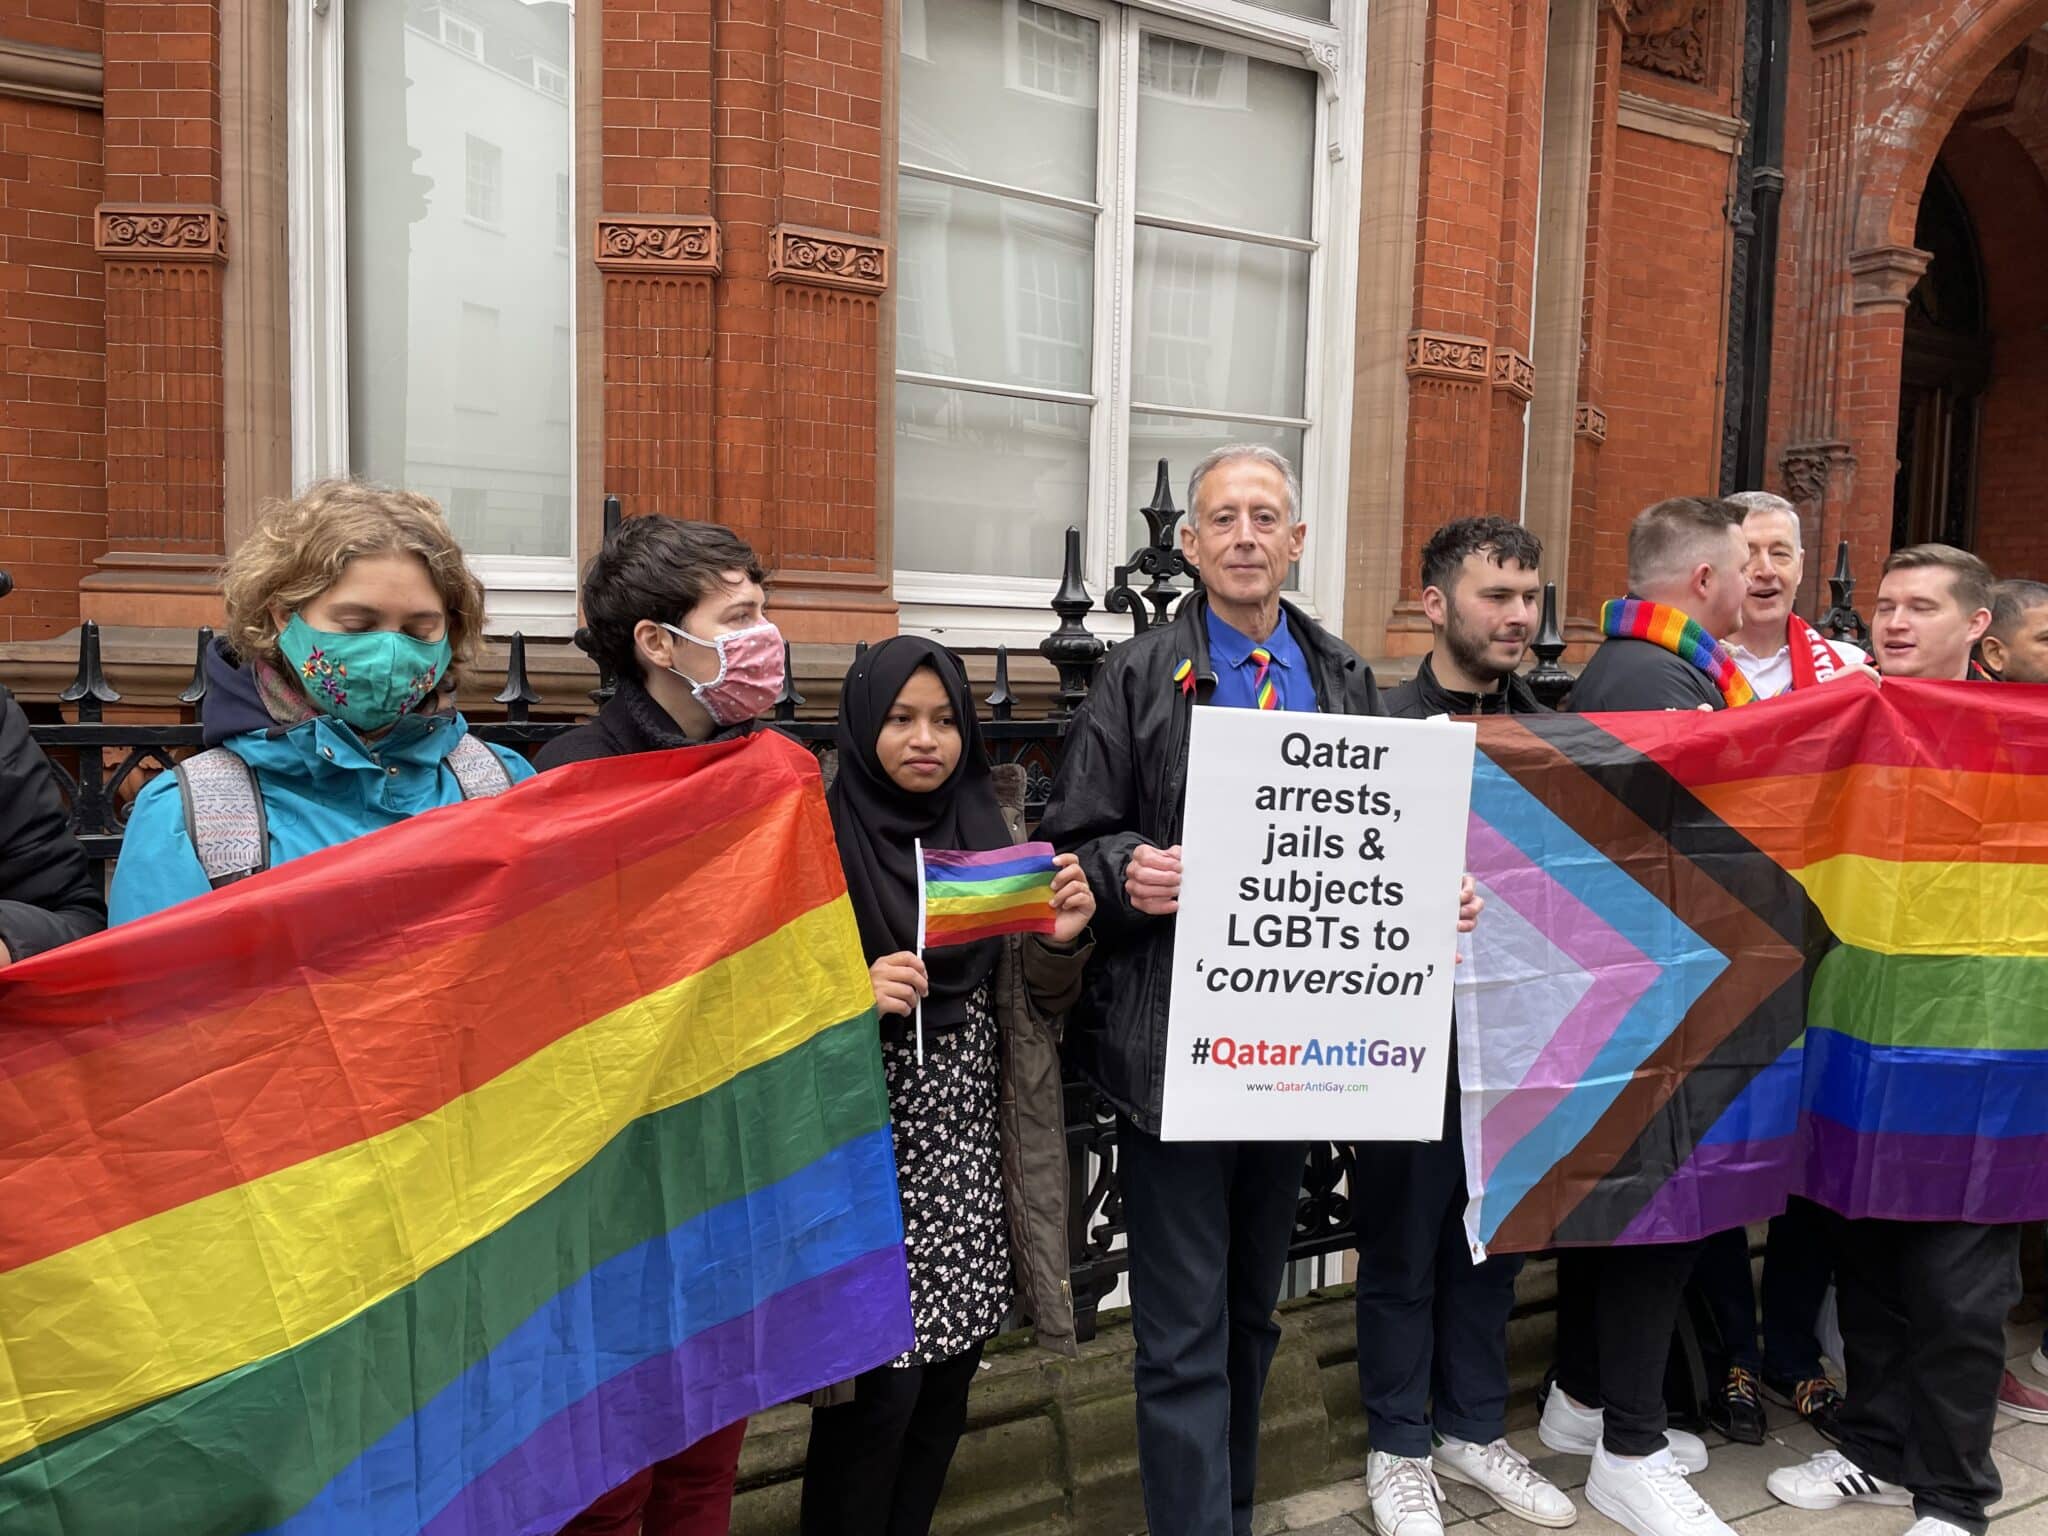 Peter Tatchell holds up a placard that reads 'Qatar arrests, jails & subjects LGBTs to conversion.' 